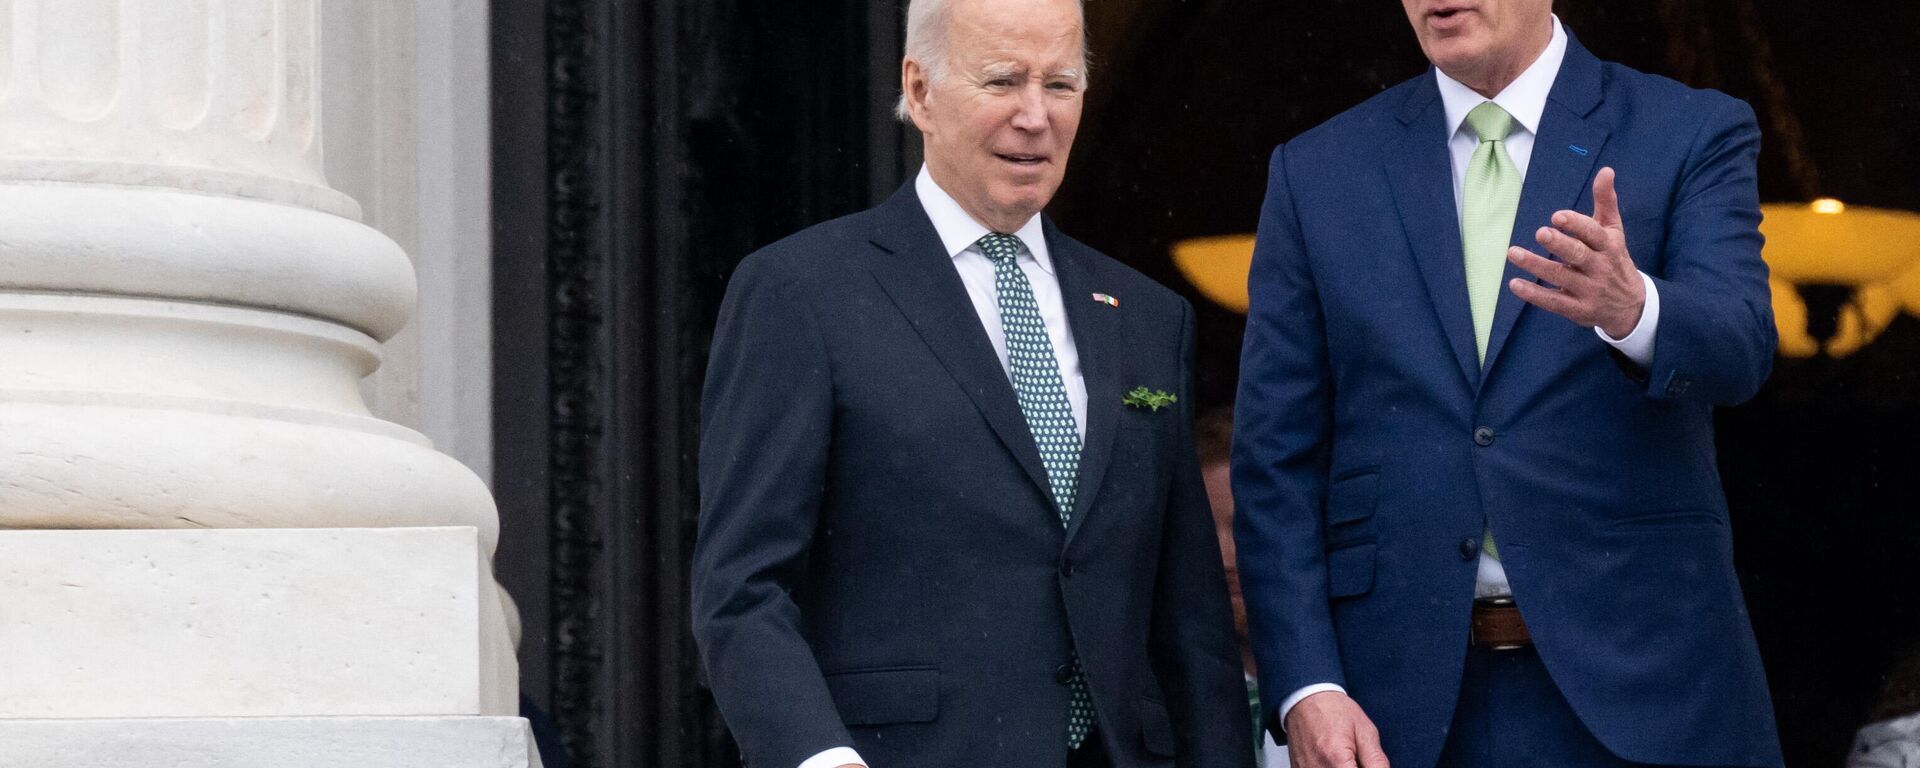 US President Joe Biden, accompanied by Speaker of the House Kevin McCarthy, Republican of California, departs after the annual Friends of Ireland luncheon on St. Patrick's Day at the US Capitol in Washington, DC, on March 17, 2023 - Sputnik International, 1920, 23.05.2023